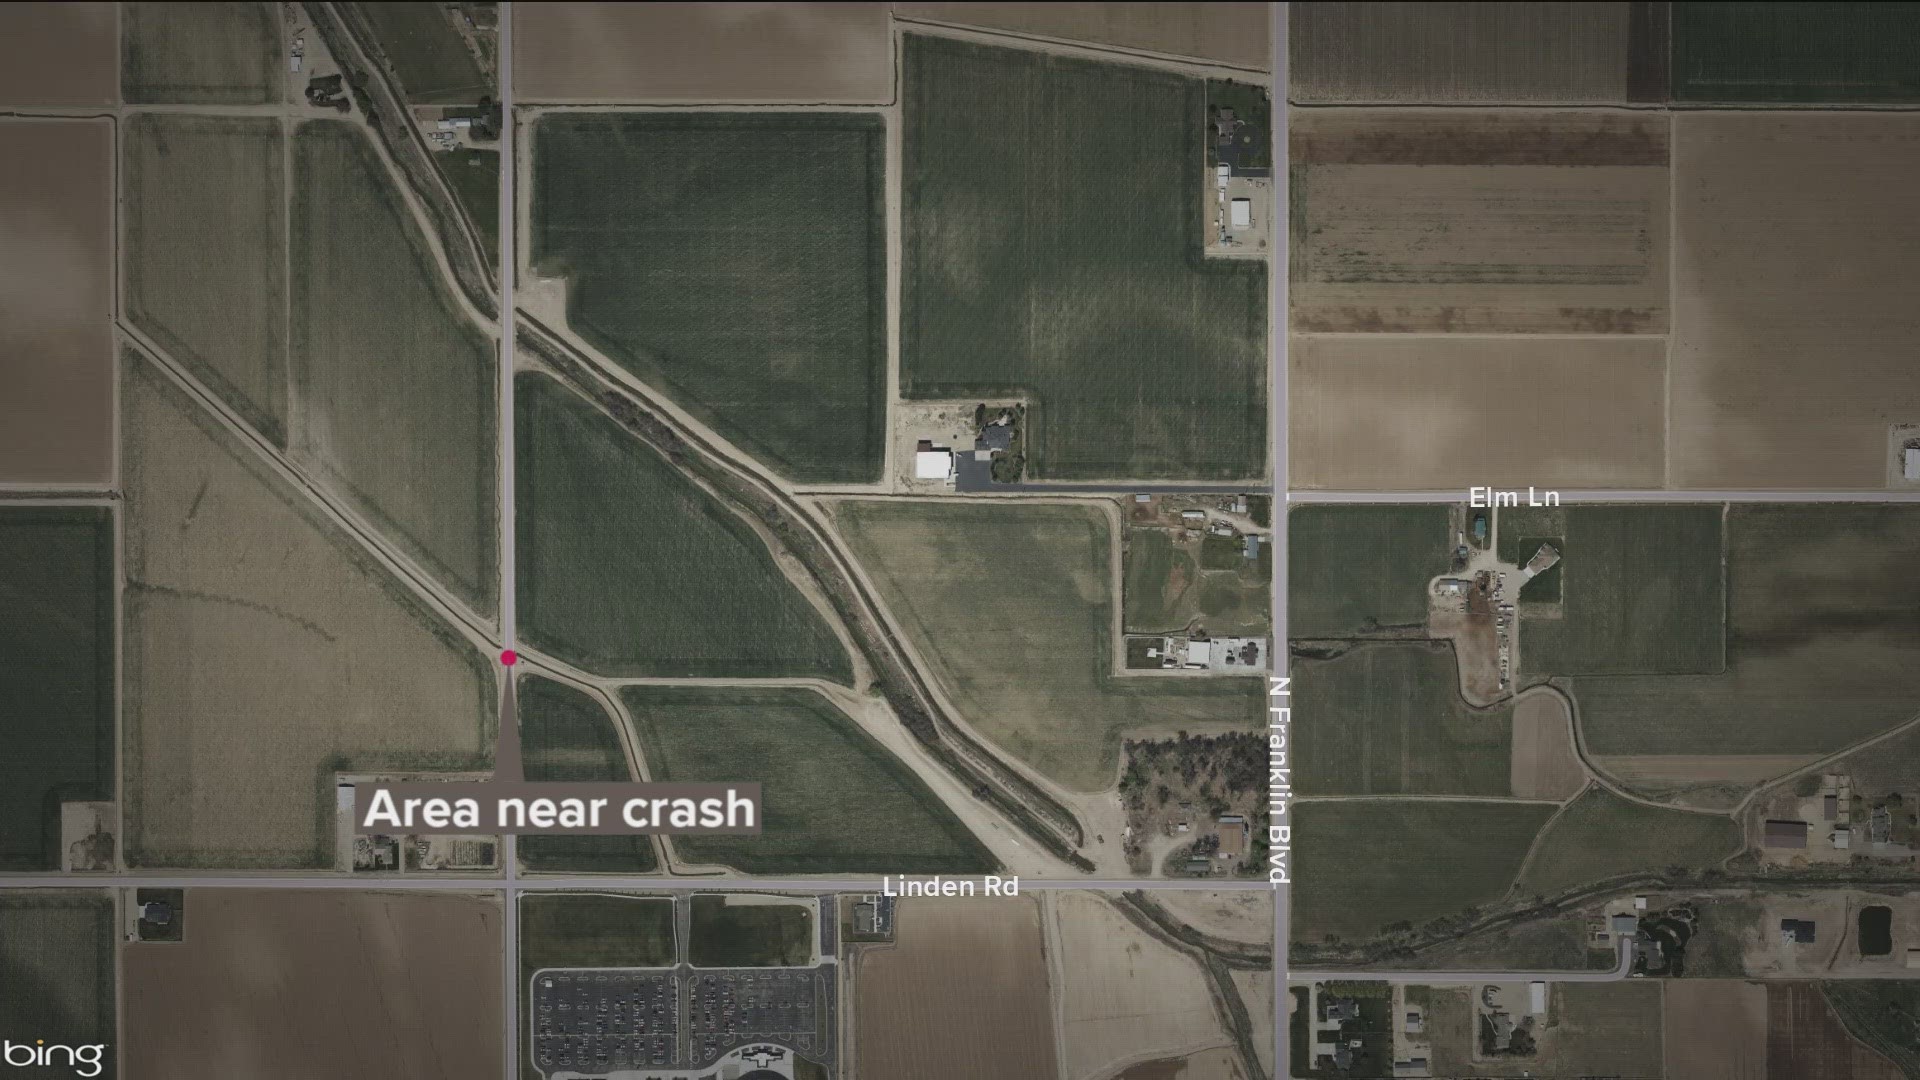 Police said the man drove off the right shoulder of Madison Road and crashed into a canal. He died at the scene of the crash Wednesday morning.